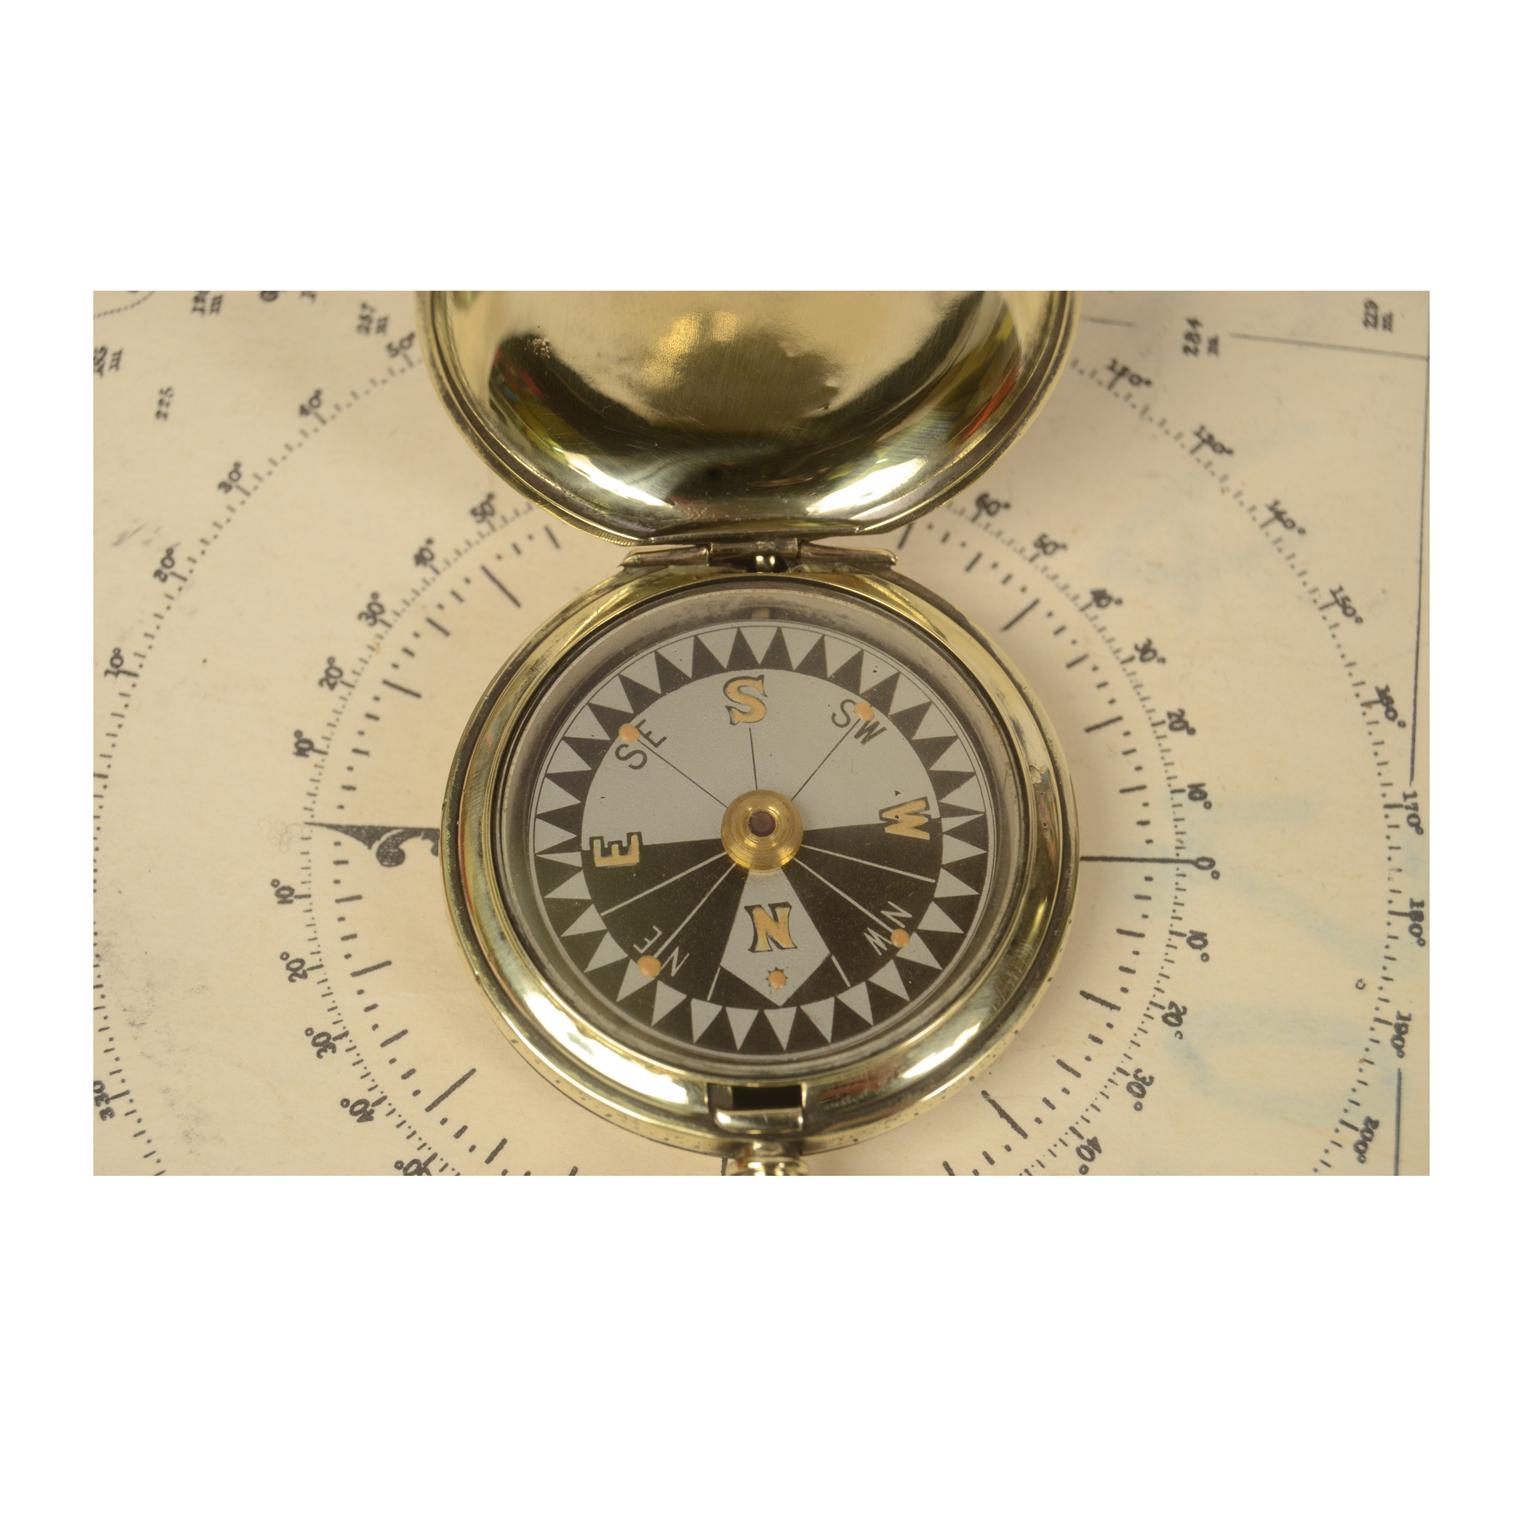 British Pocket Compass Used by RAF Officers in the WWI